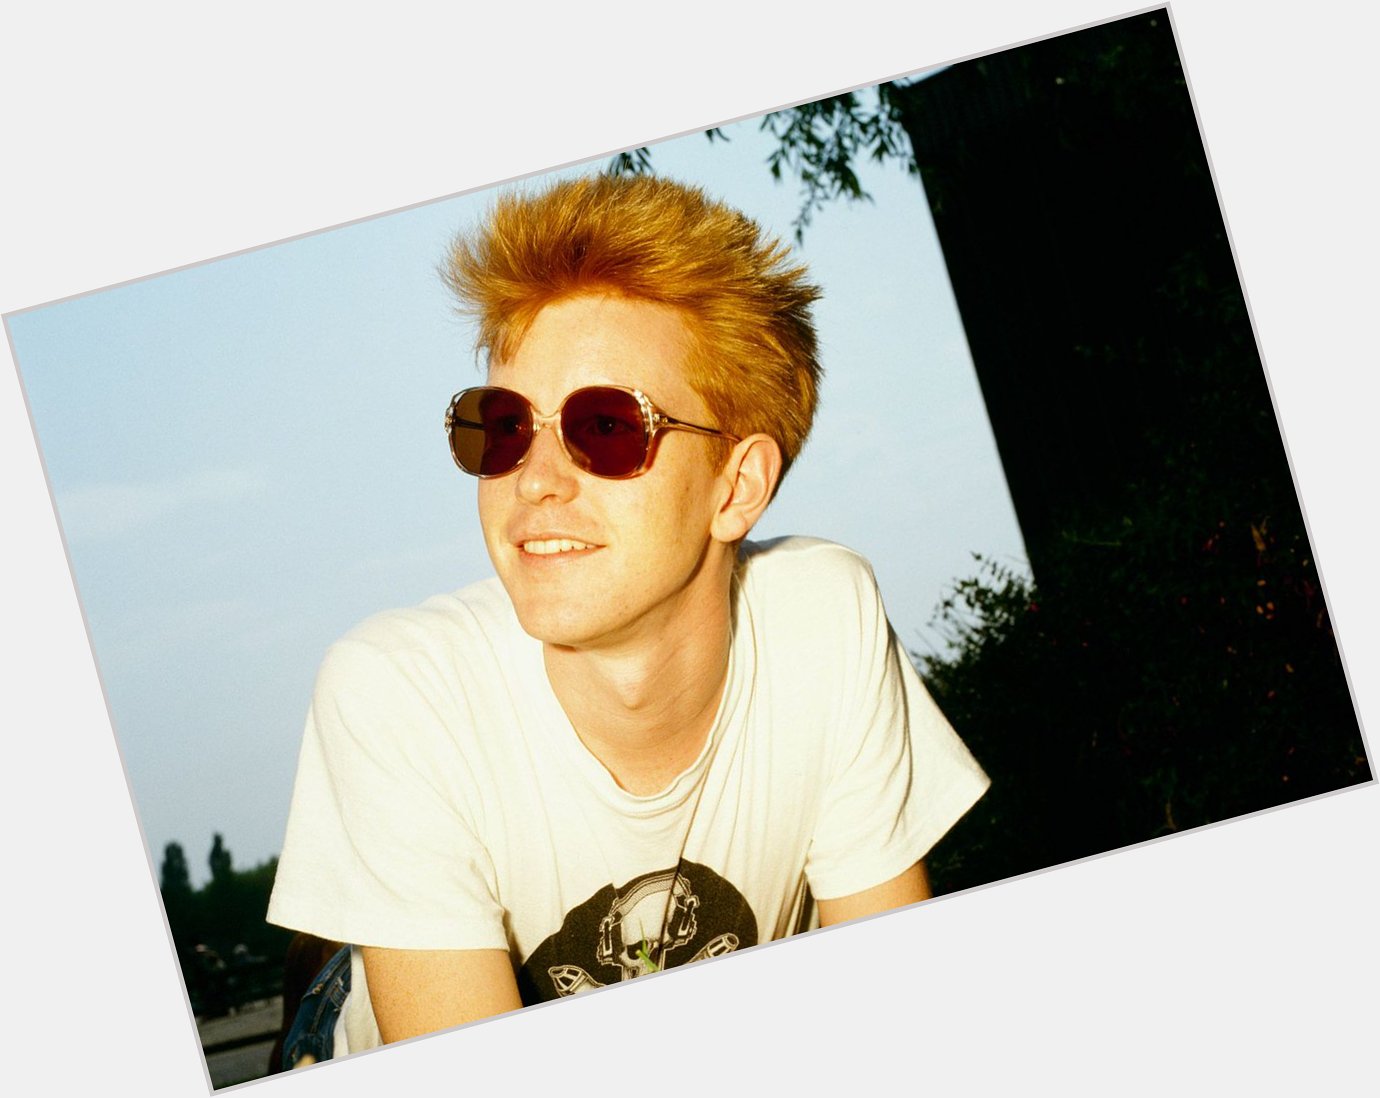 Happy birthday to Andy Fletcher. Gone but will never be forgotten. 